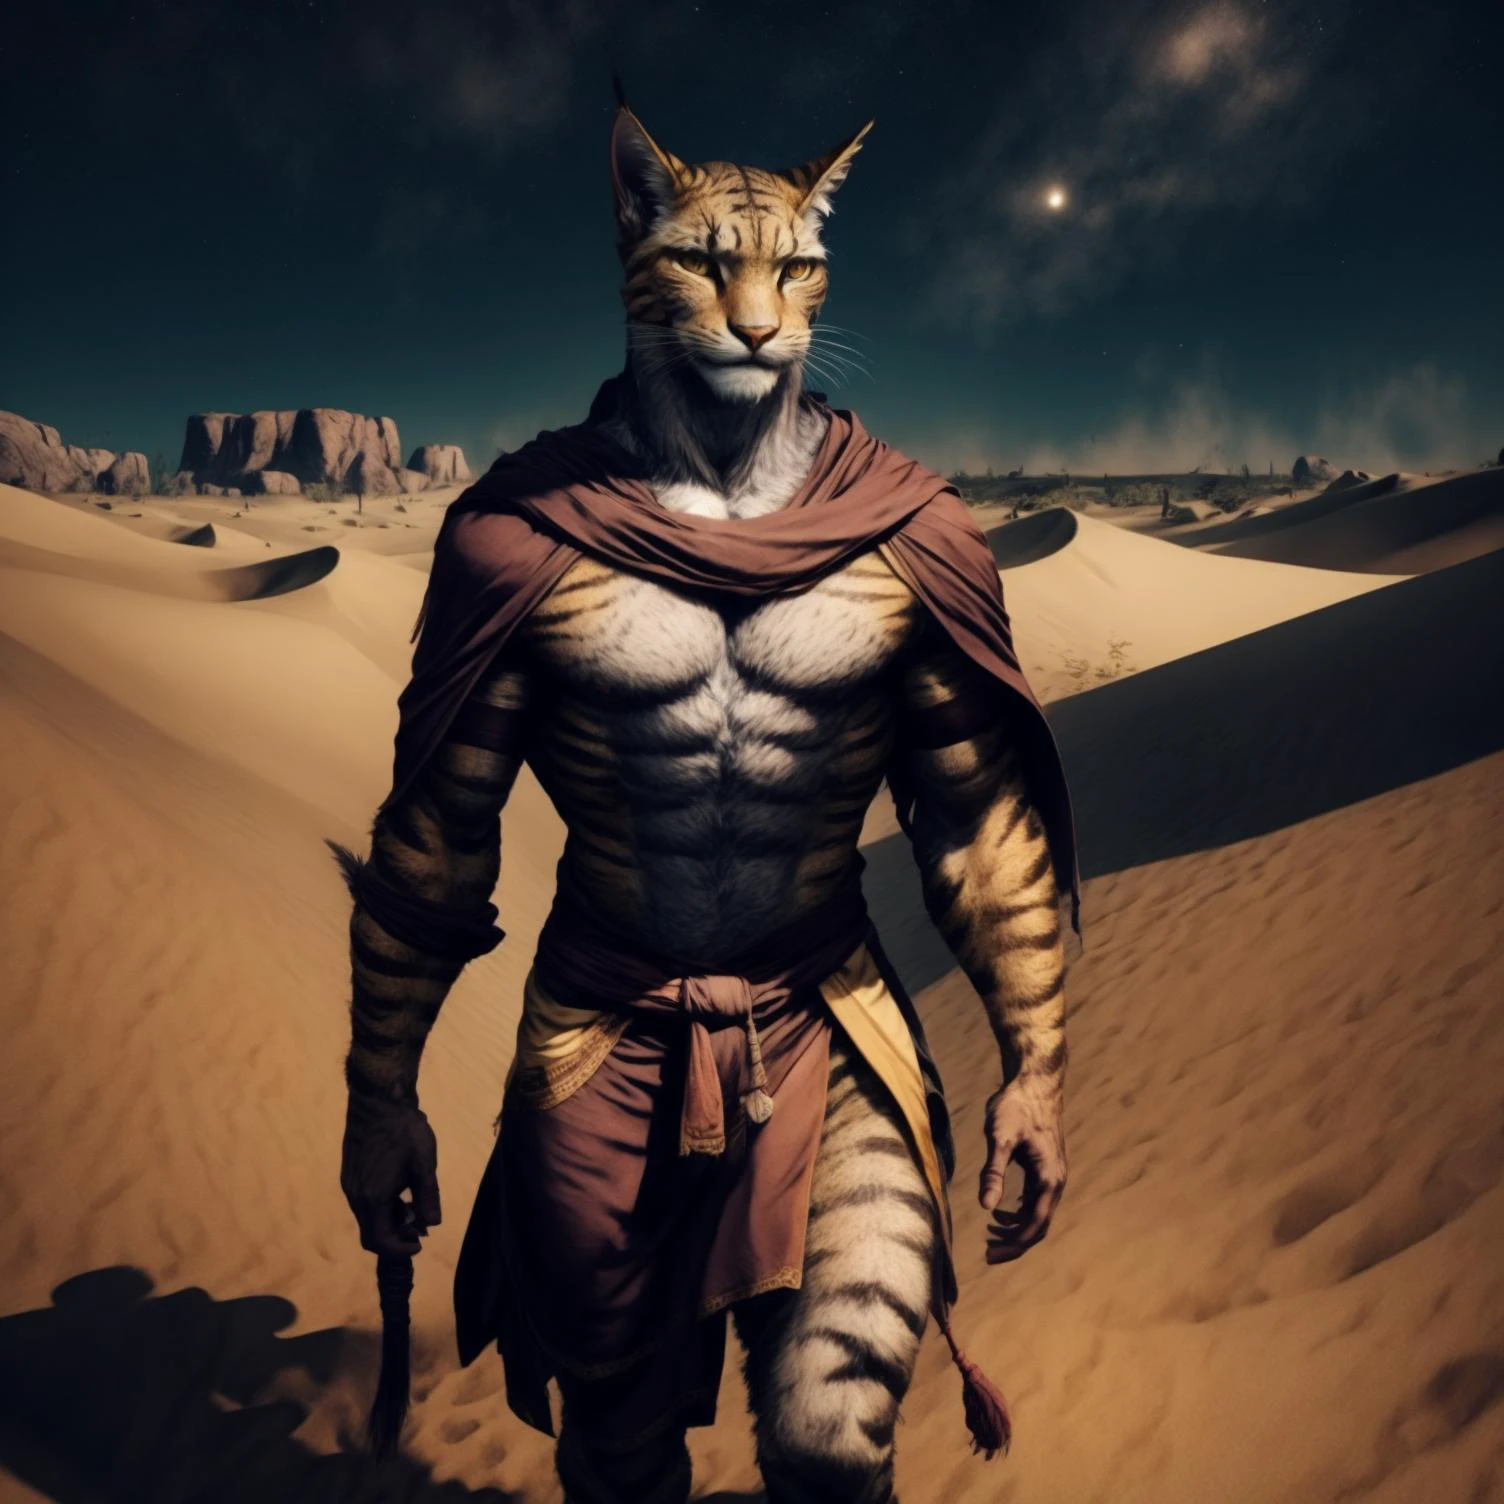 Khajiit male, in the desert at night, wearing a brown cloth loincloth, traveling across the dunes. Khajiit-Male